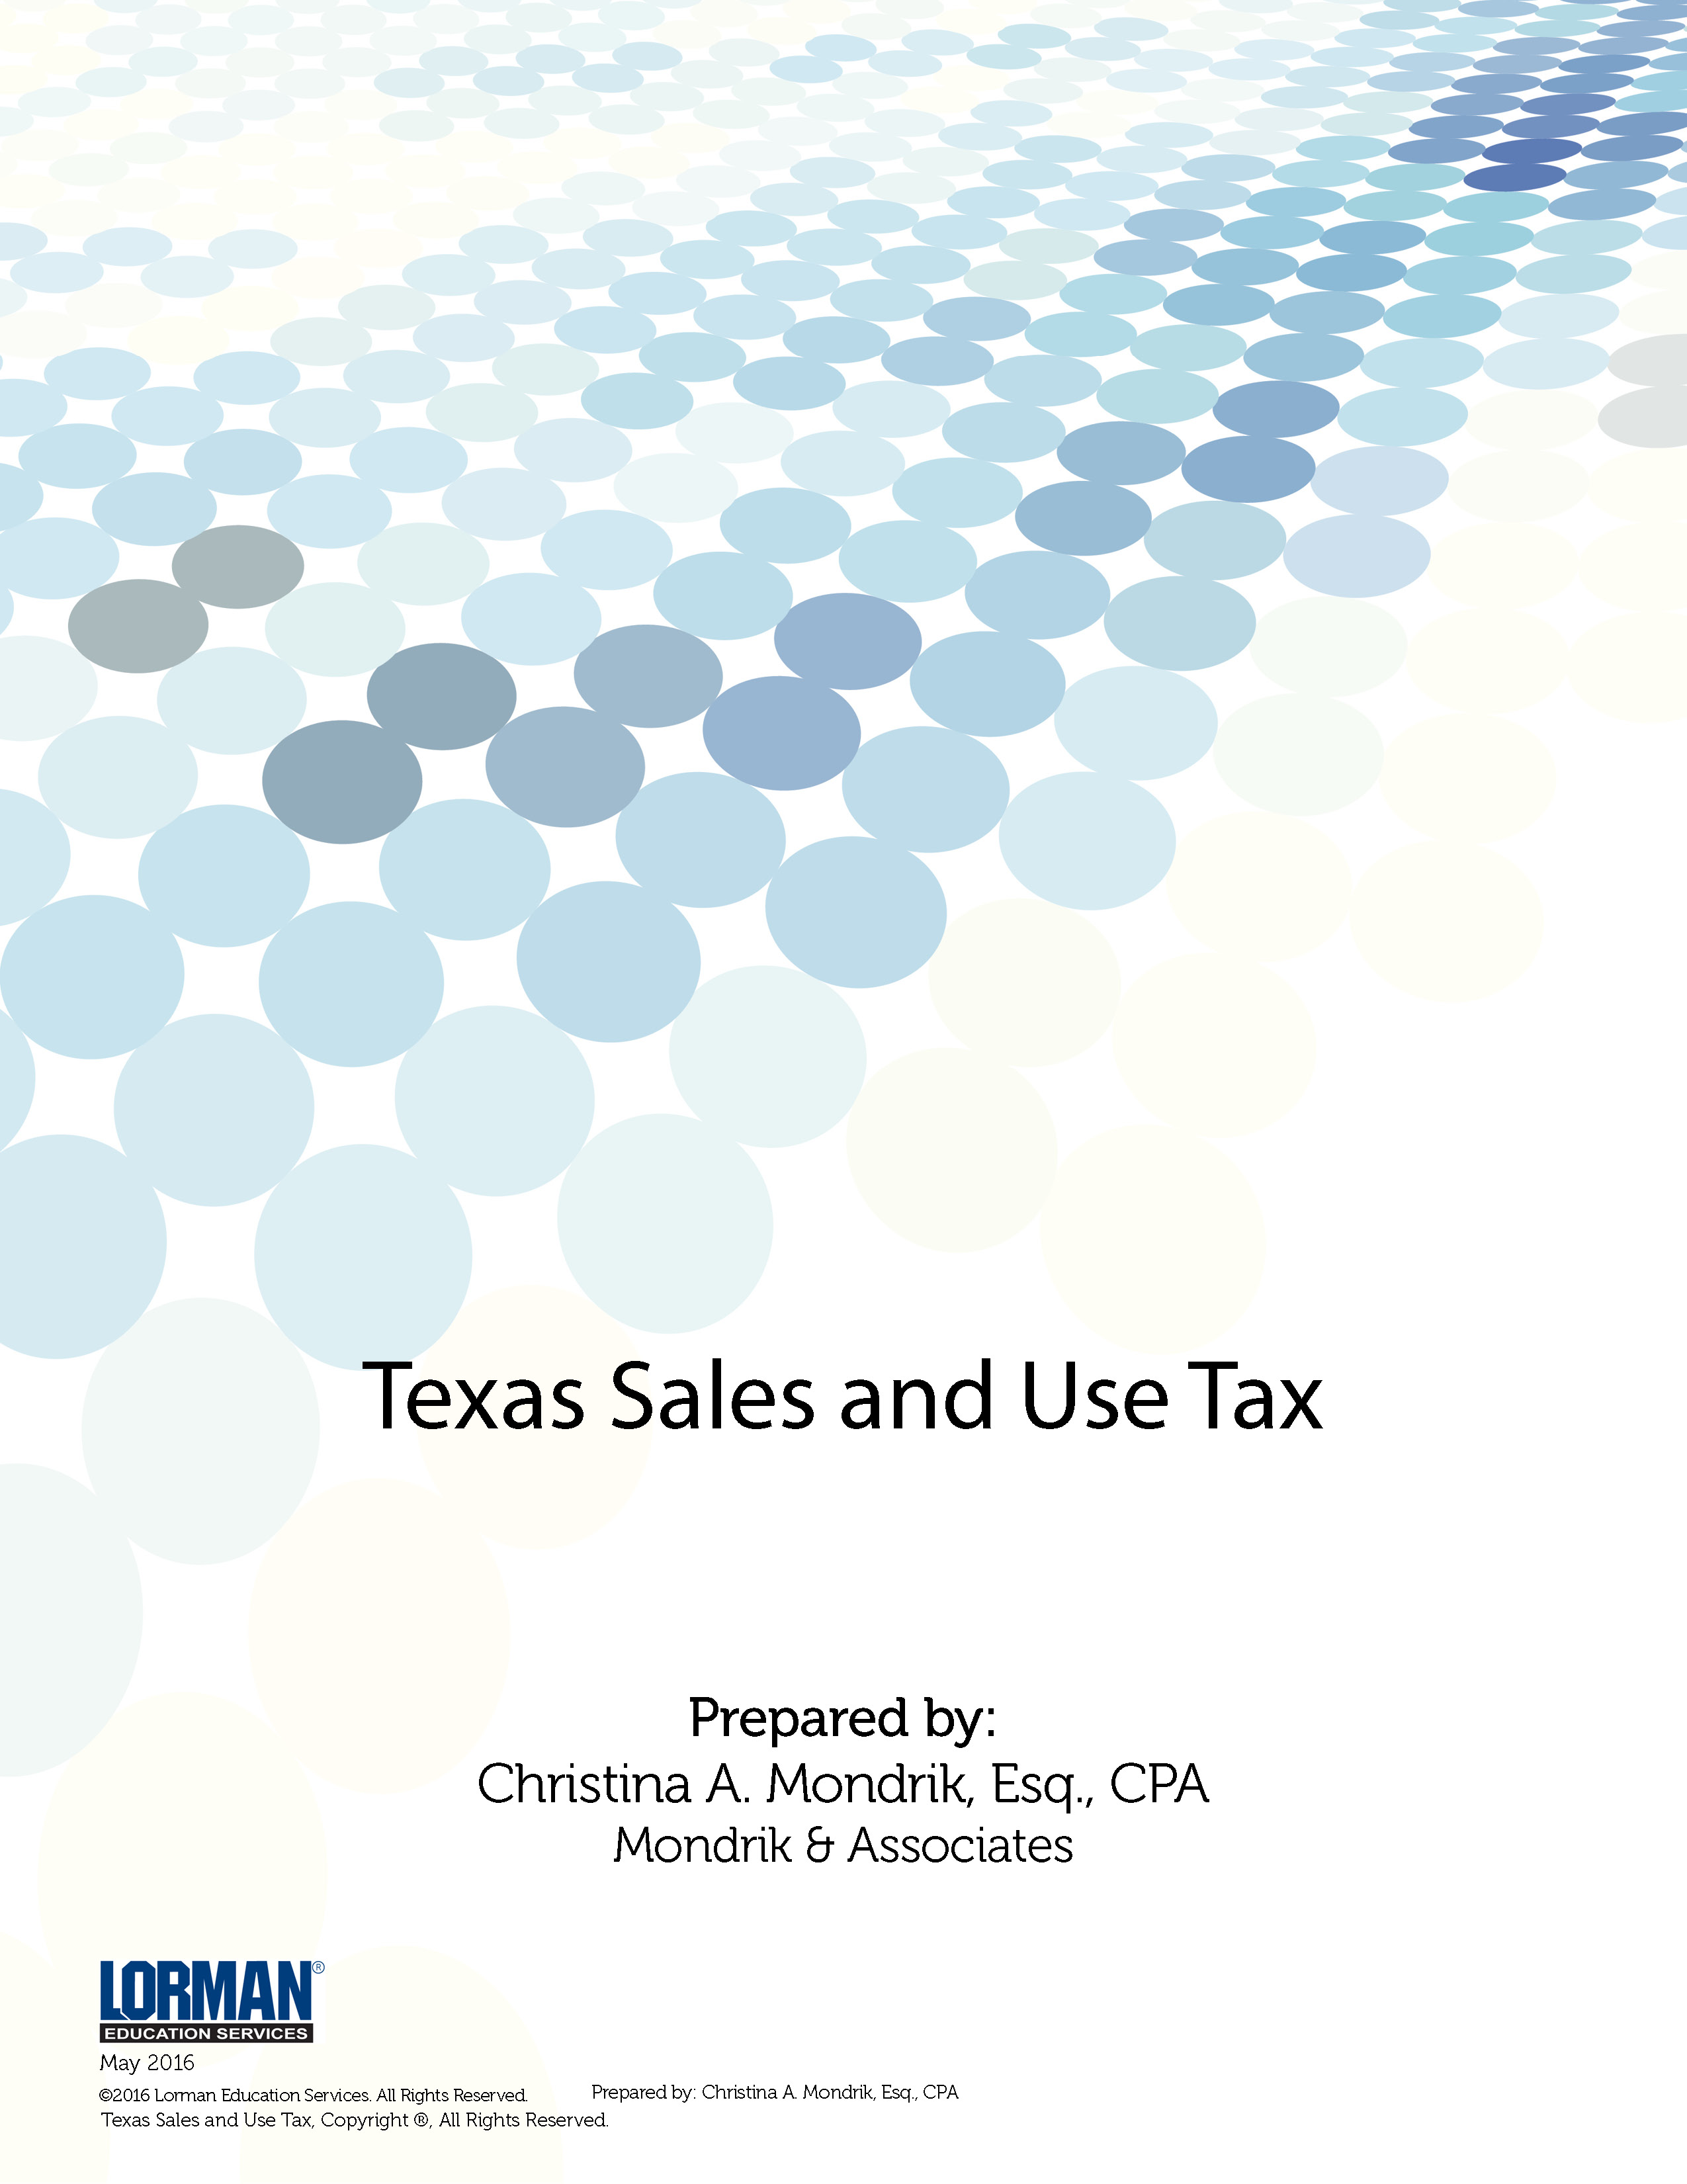 Texas Sales and Use Tax